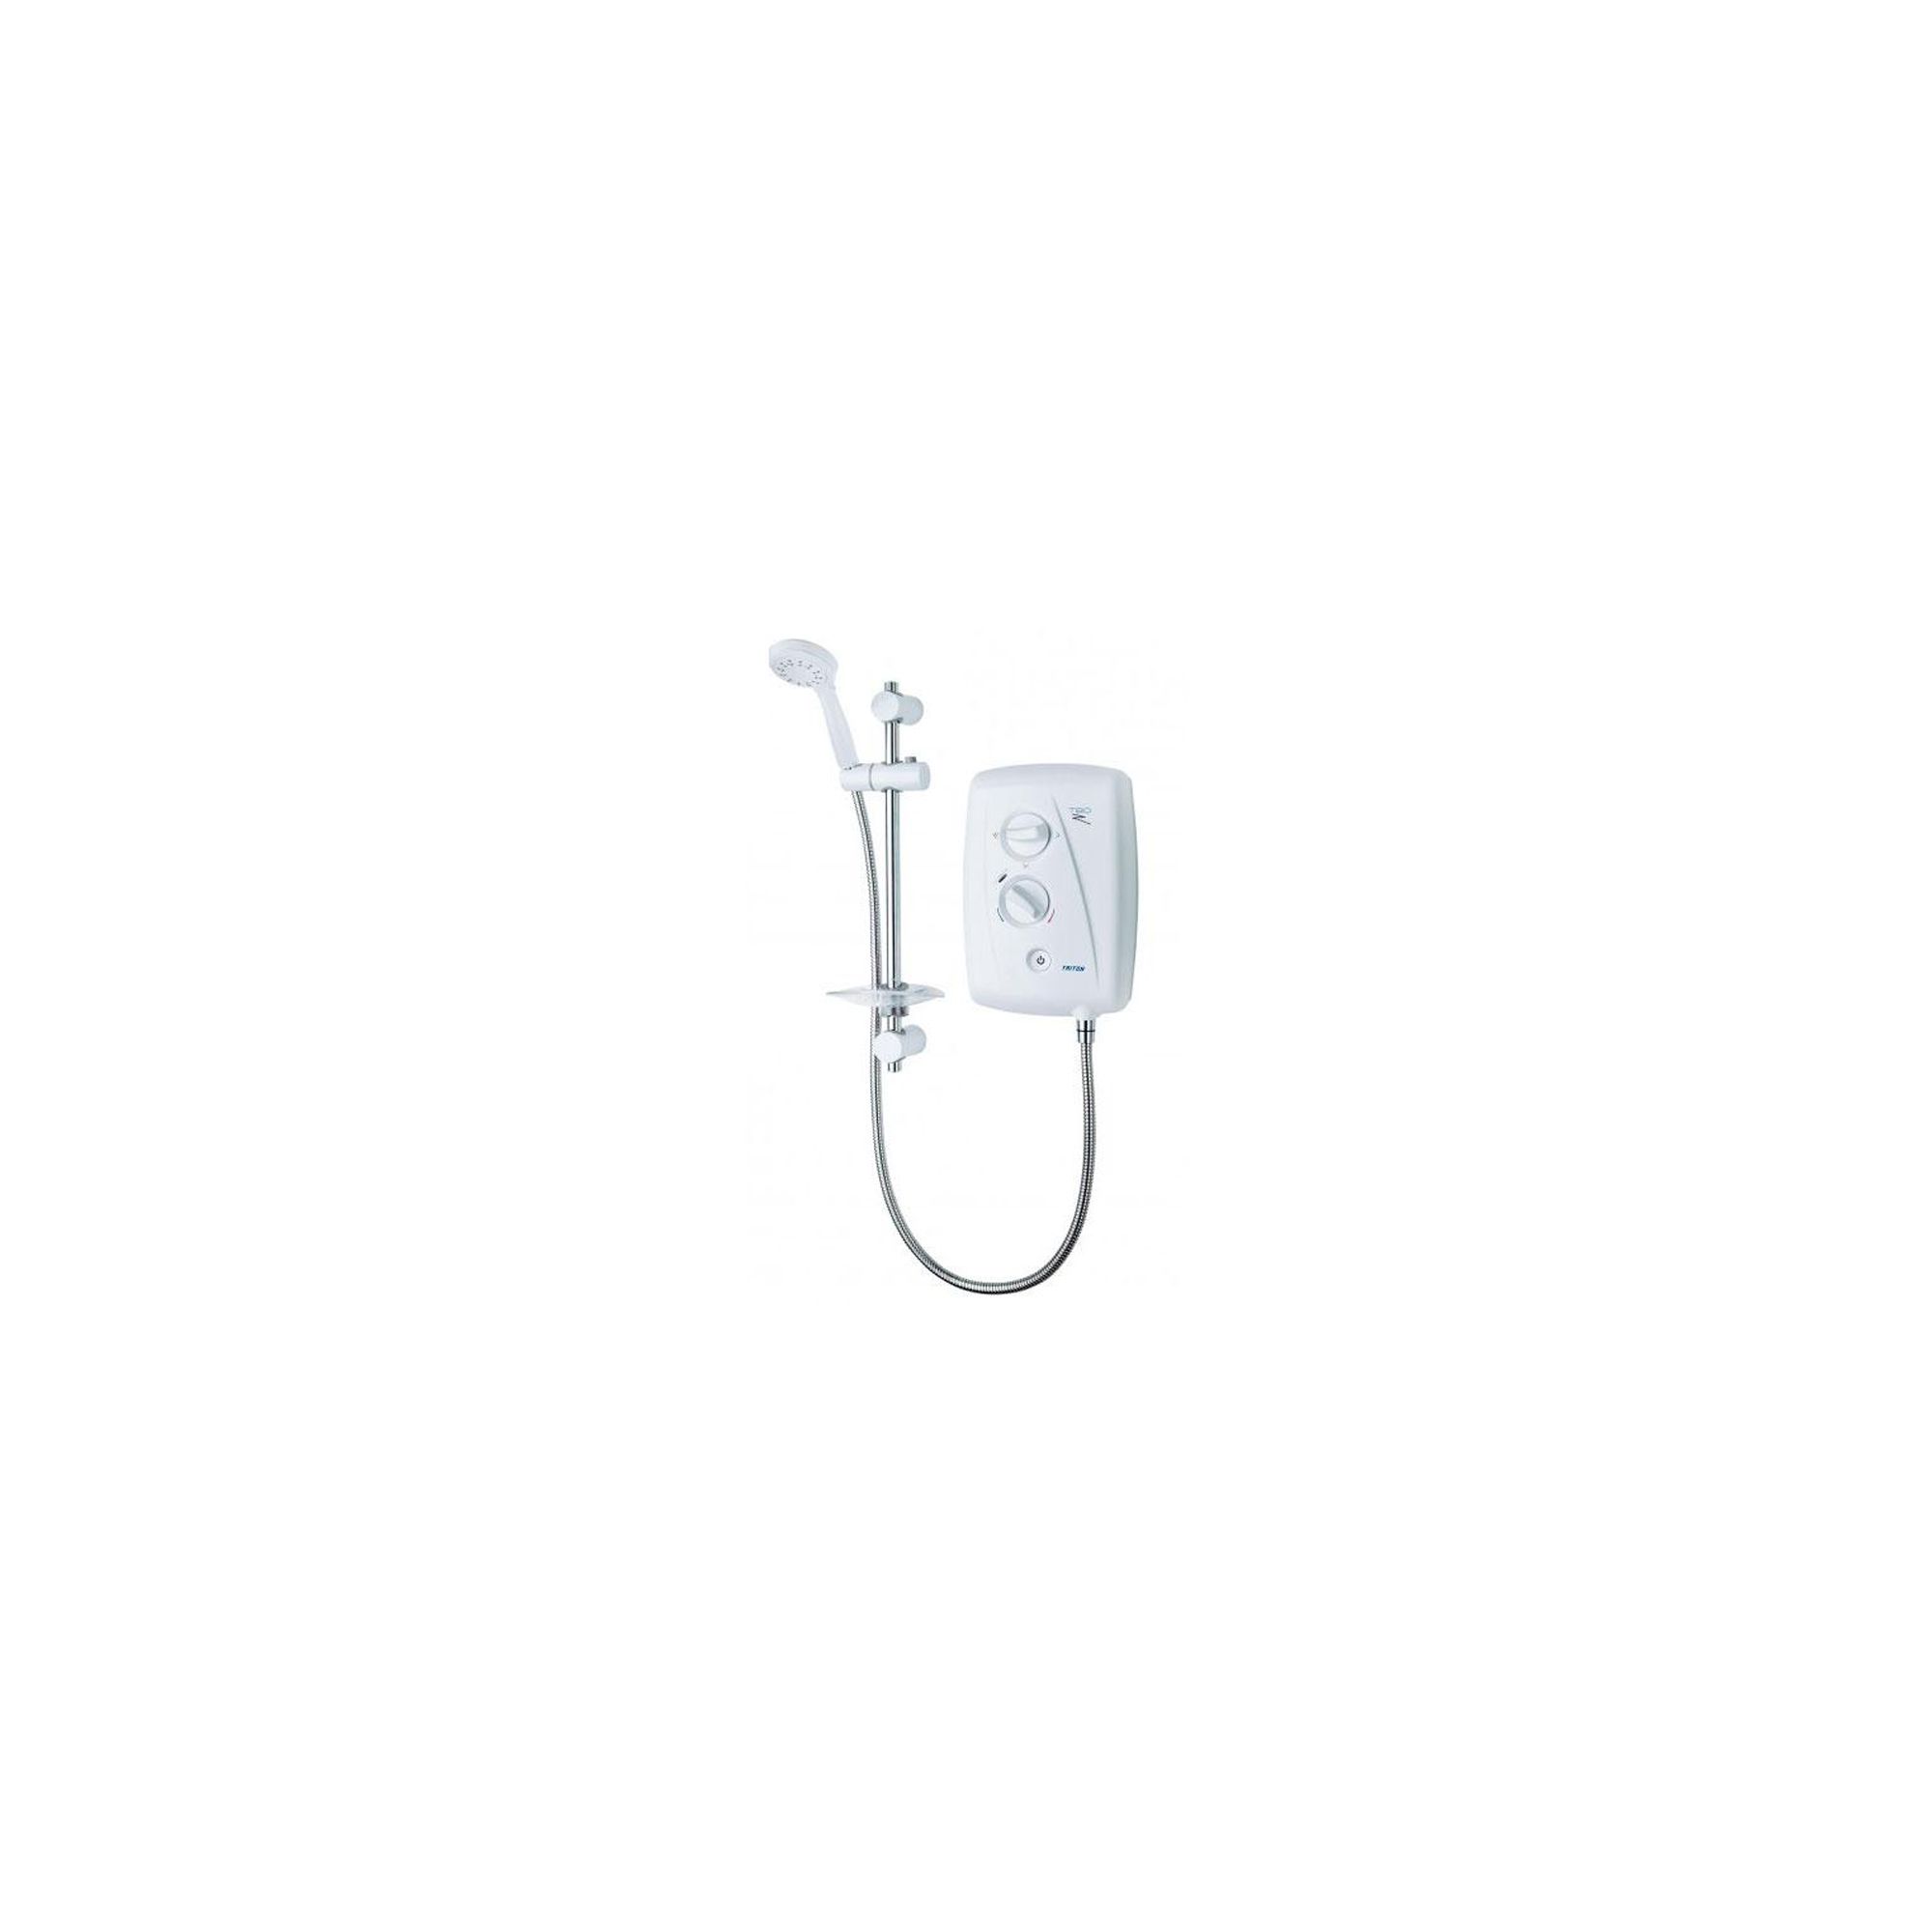 Triton T80Z Fast-Fit Electric Shower White/Chrome 9.5 kW at Tesco Direct